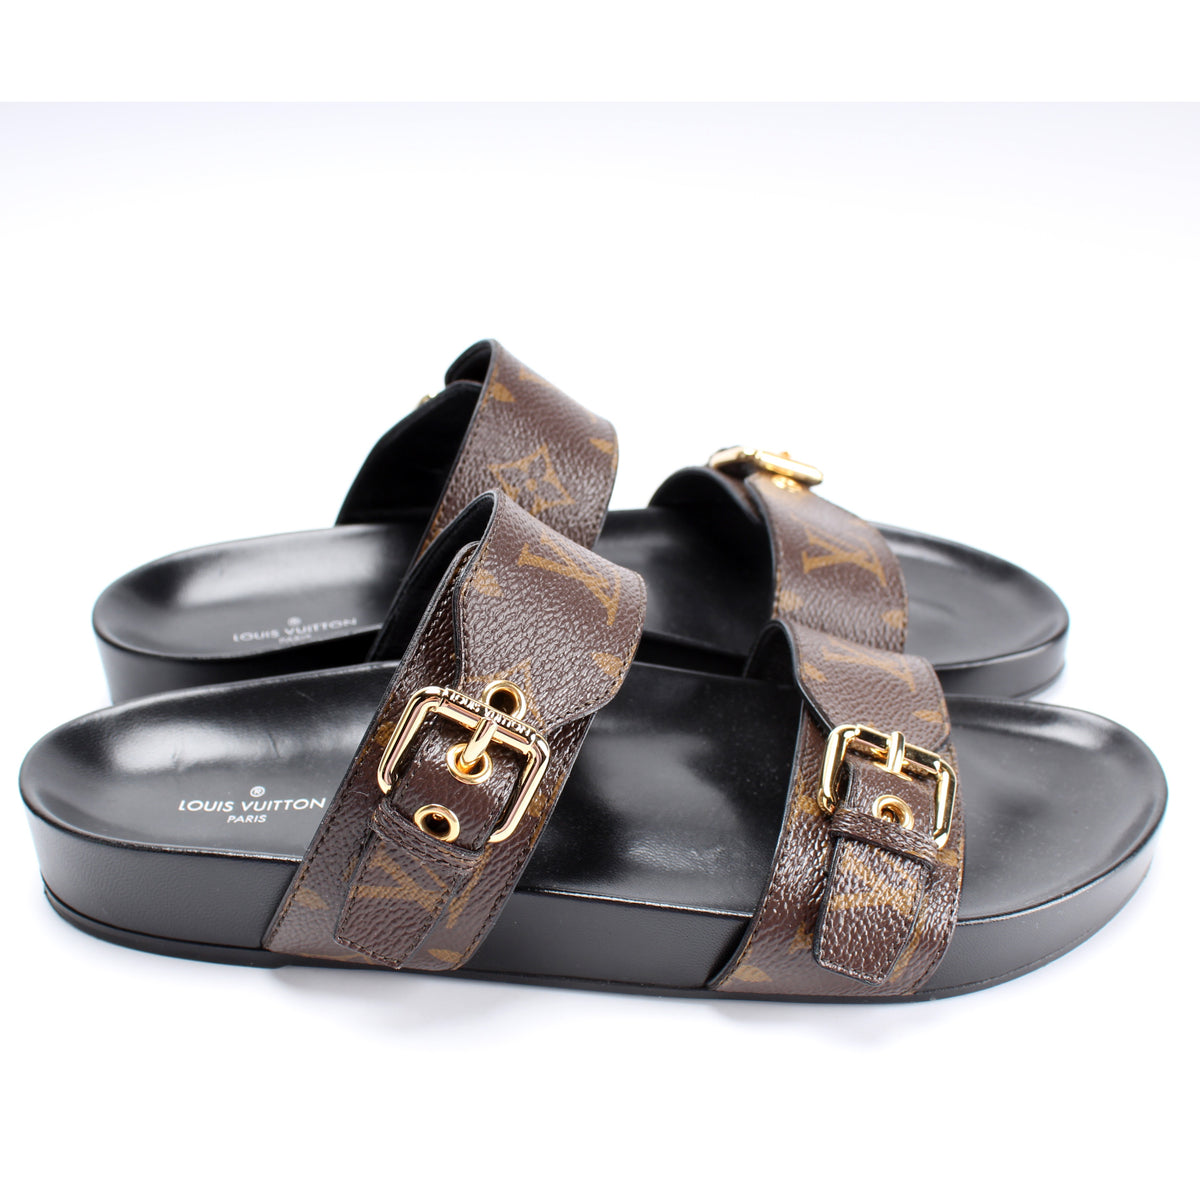 Louis Vuitton - Authenticated Bom Dia Sandal - Leather Brown Abstract for Women, Very Good Condition